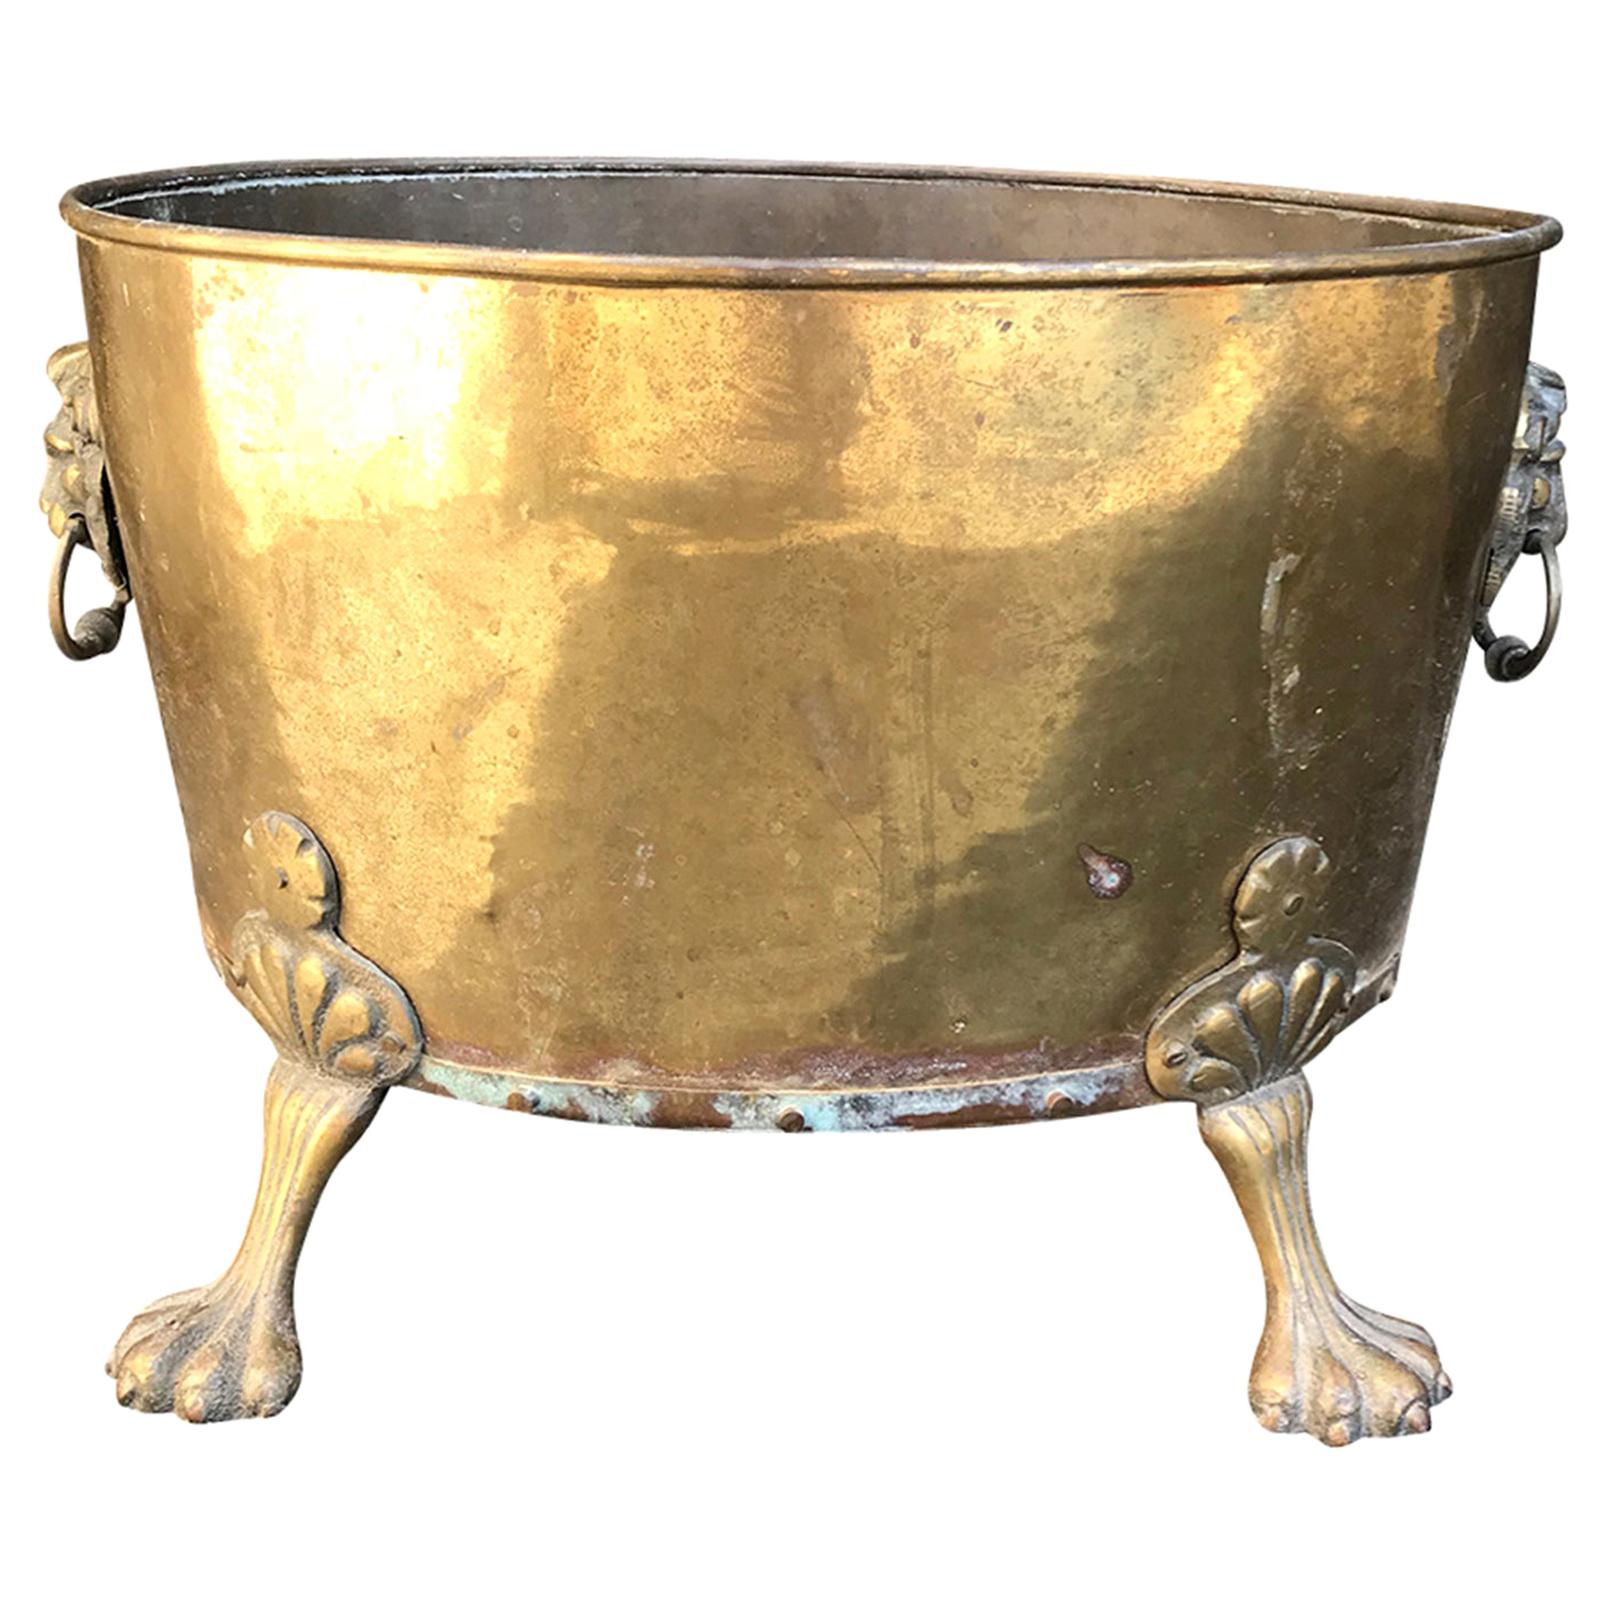 Large English Brass Cachepot, Marked "Made in England", circa 1900